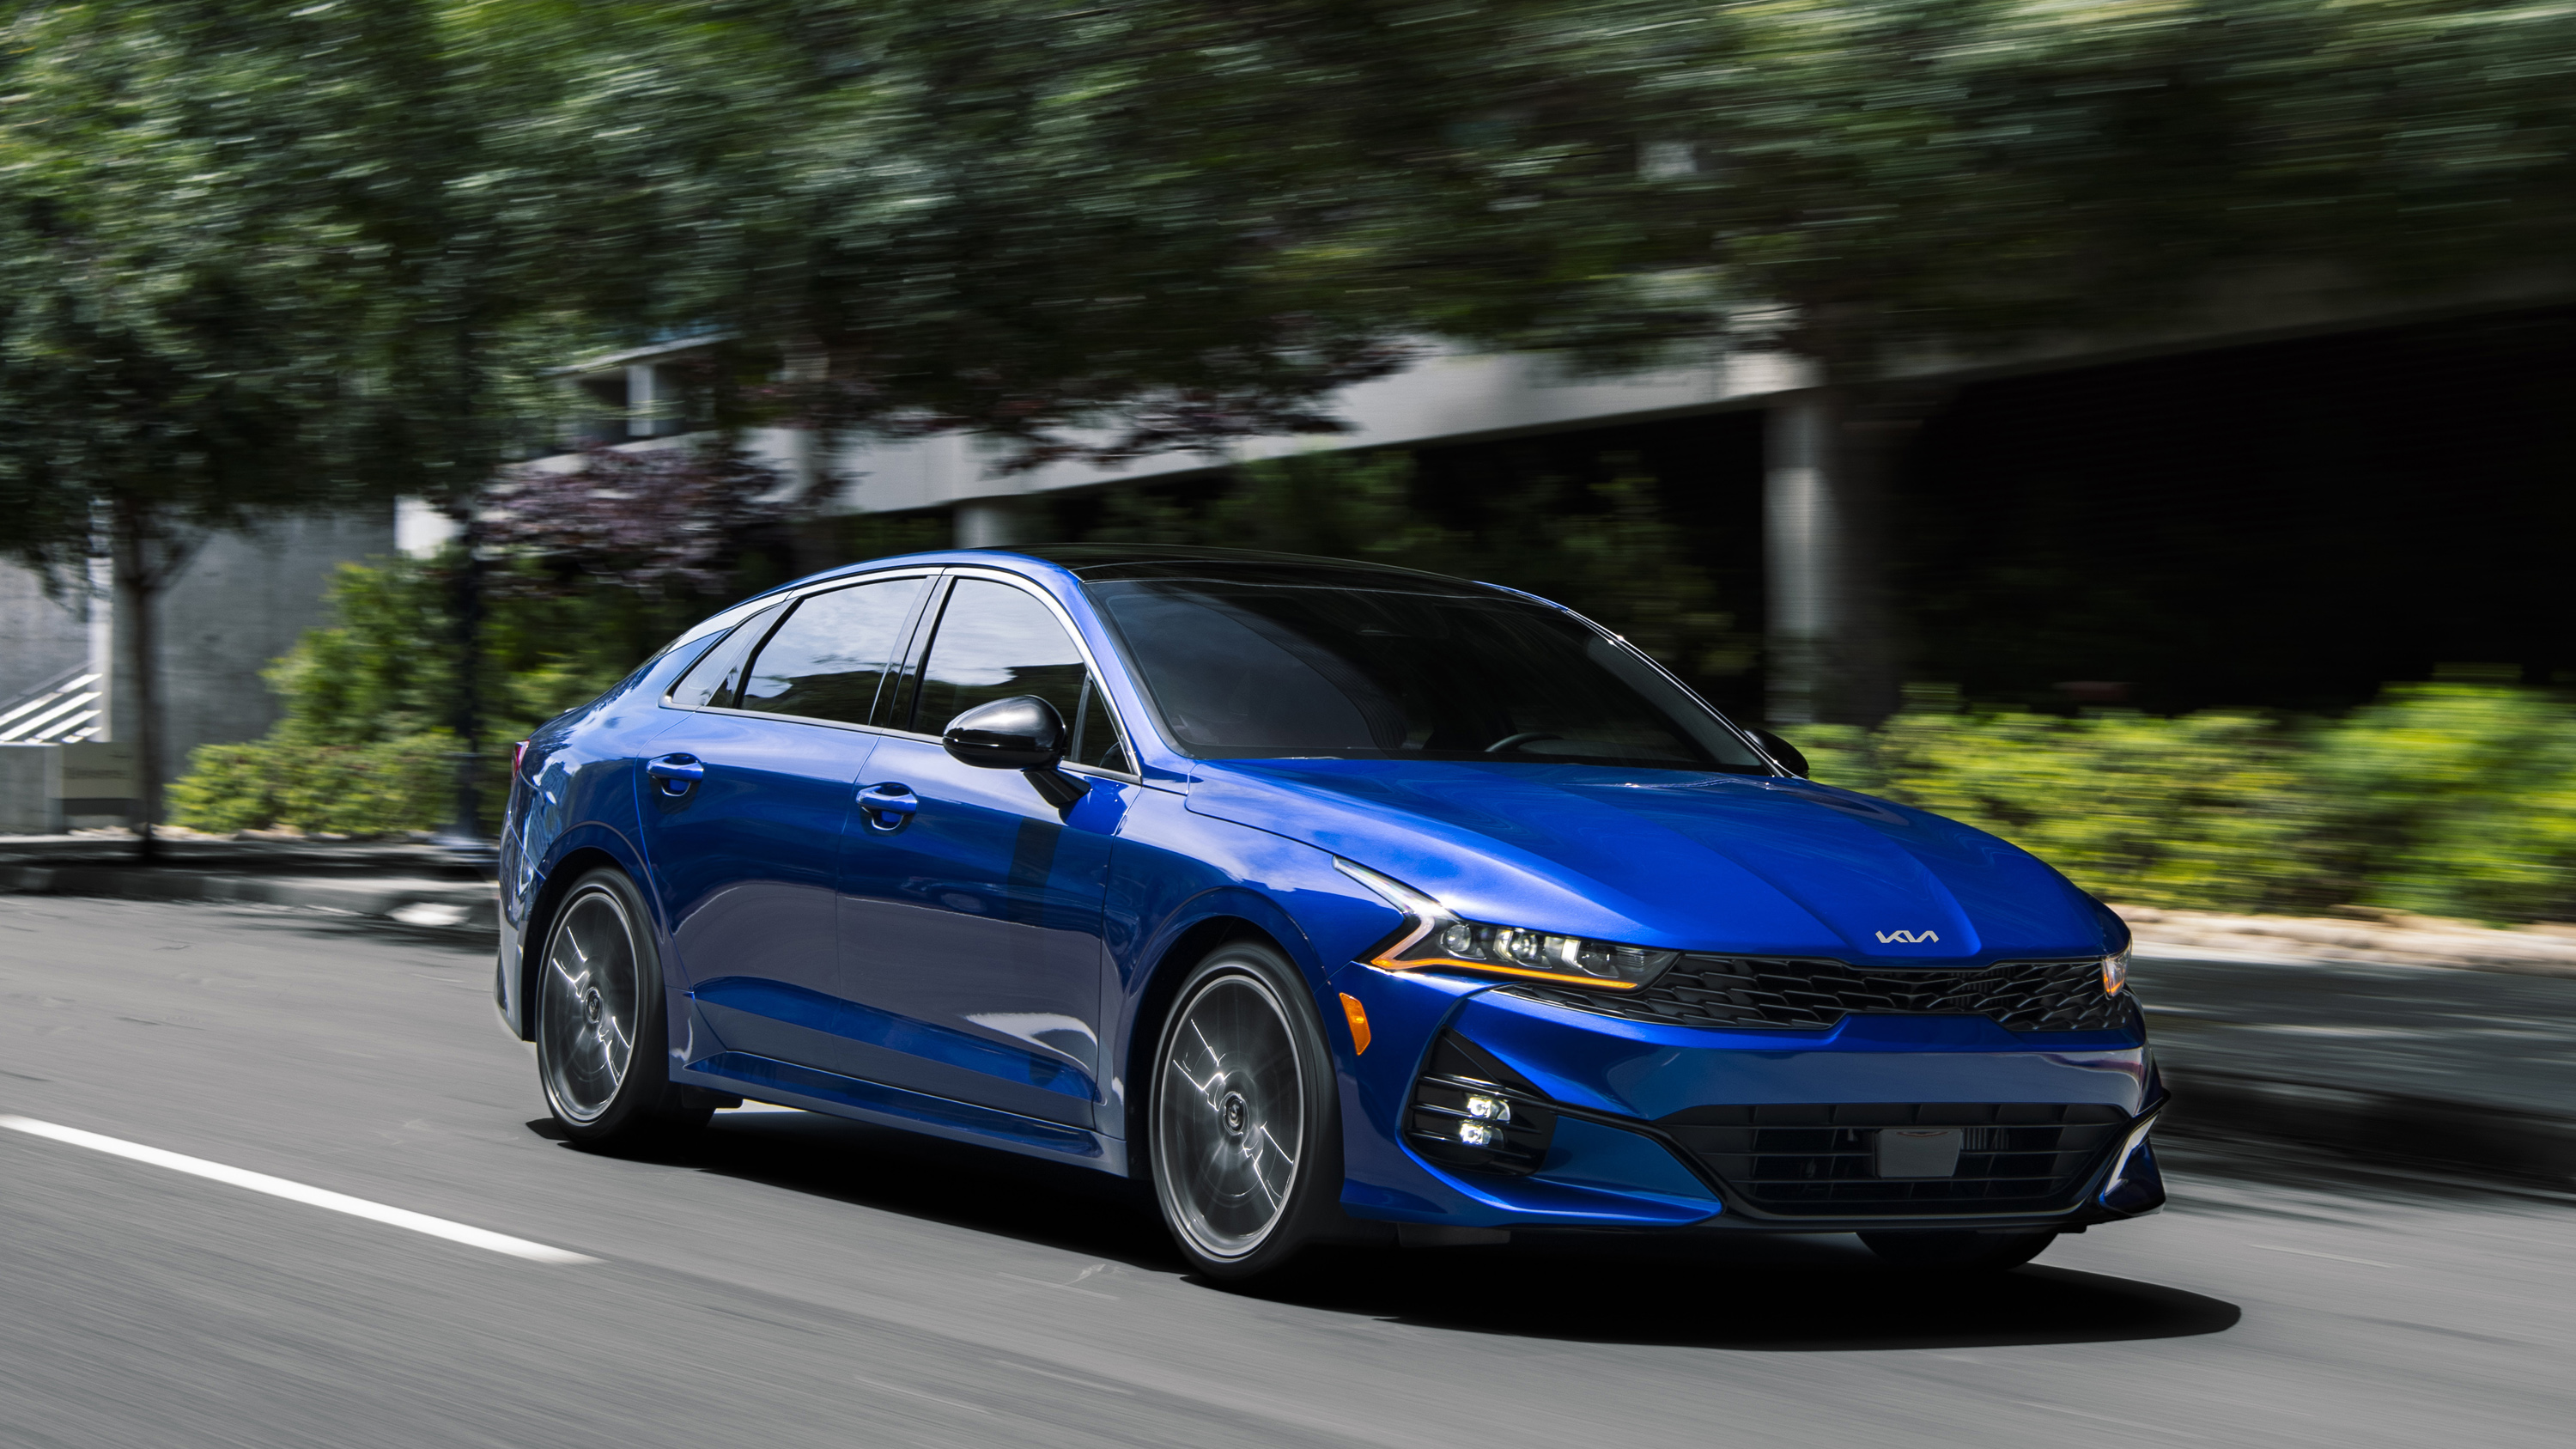 2023 Kia K5 punches ticket to new model year with minor changes